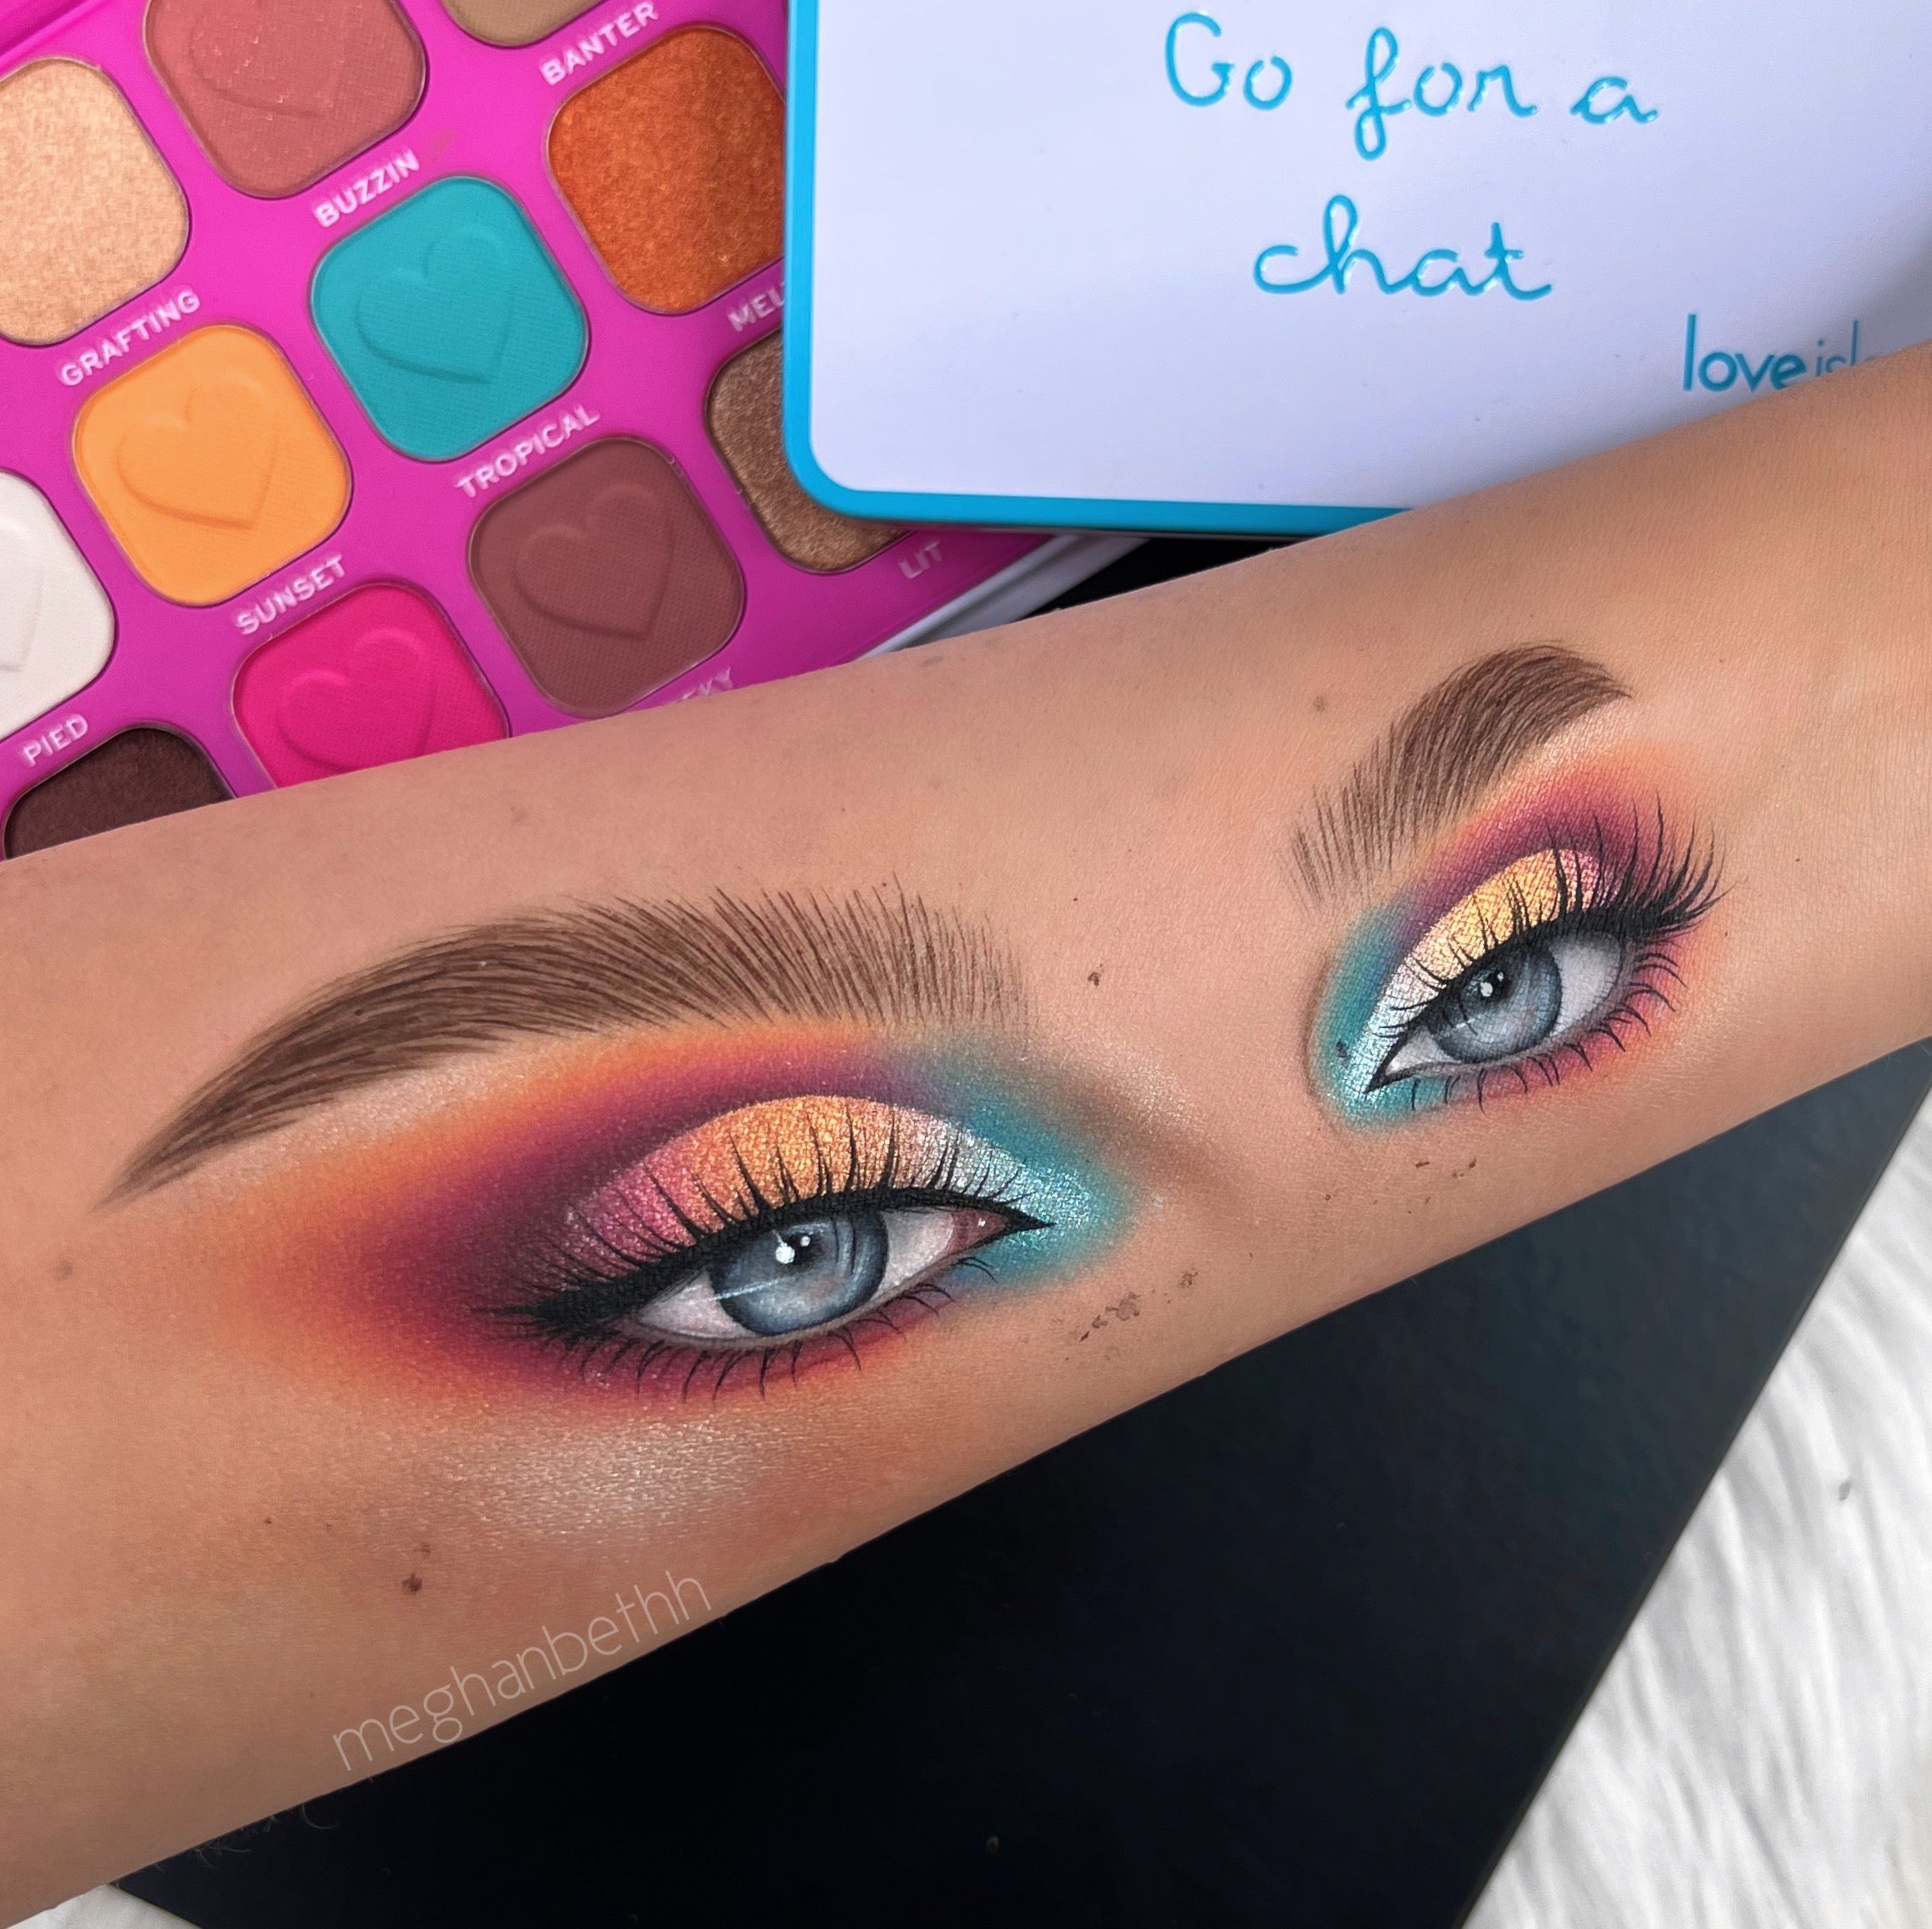 Makeup Revolution x Love Island Go for a Chat Dynamic Palette